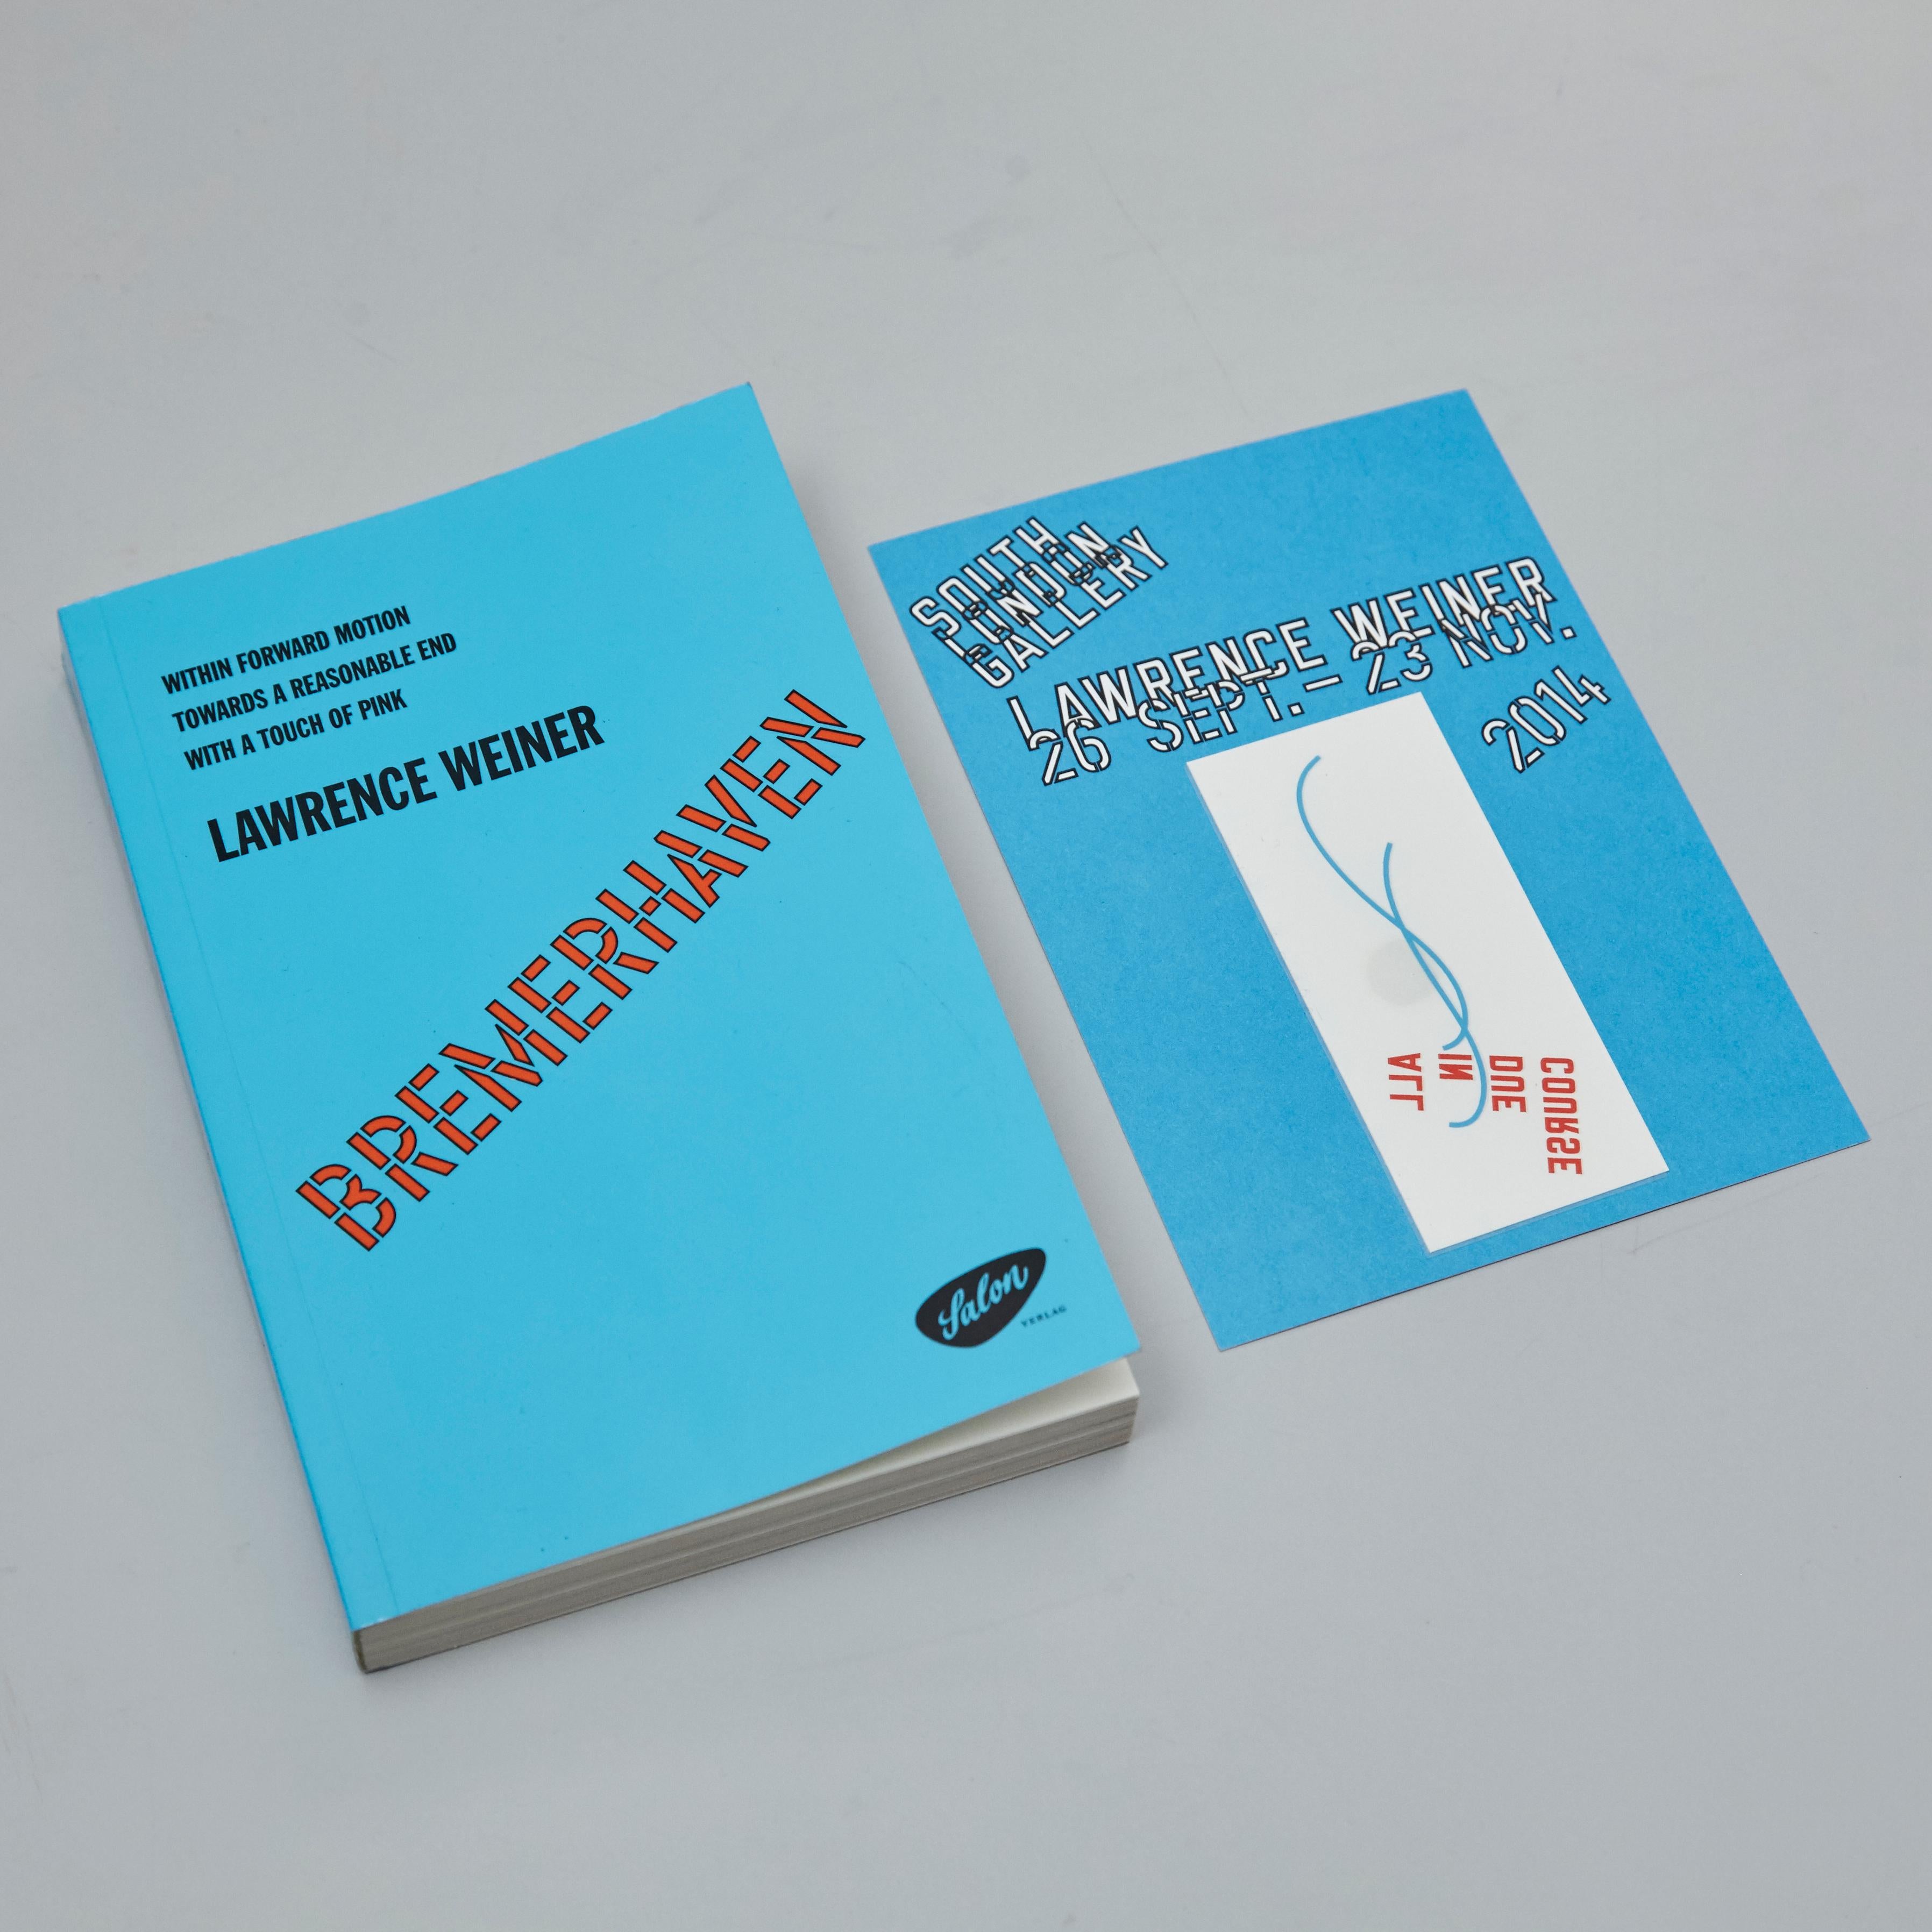 Lawrence Weiner Limited Edition Book and Tattoo, South London Gallery, 2014 For Sale 2